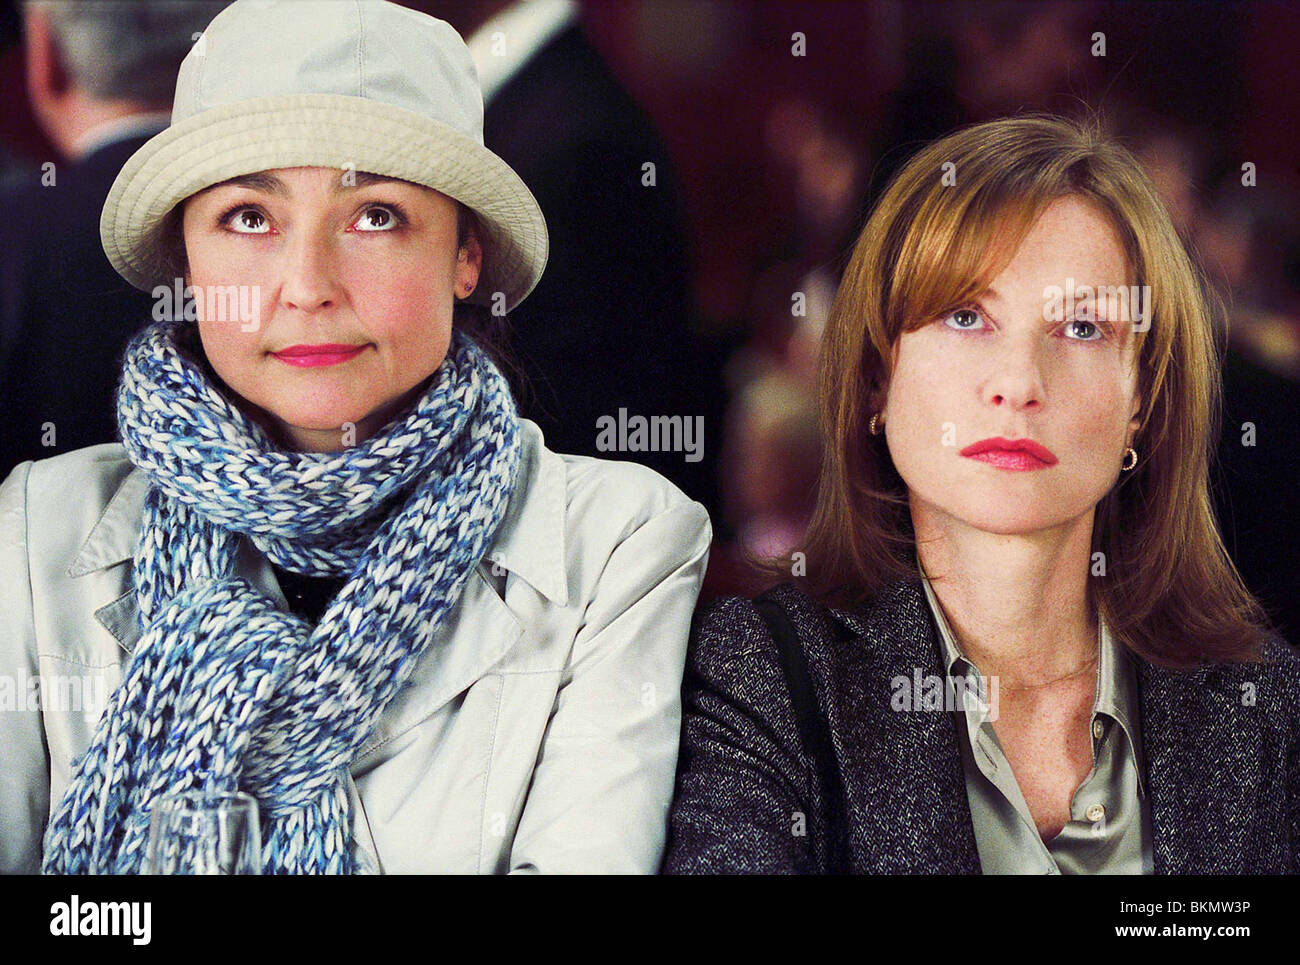 ME AND MY SISTER (2004) LES SOEURS FACHEES (ALT) CATHERINE FROT, ISABELLE HUPPERT MESI 001-02 Stock Photo